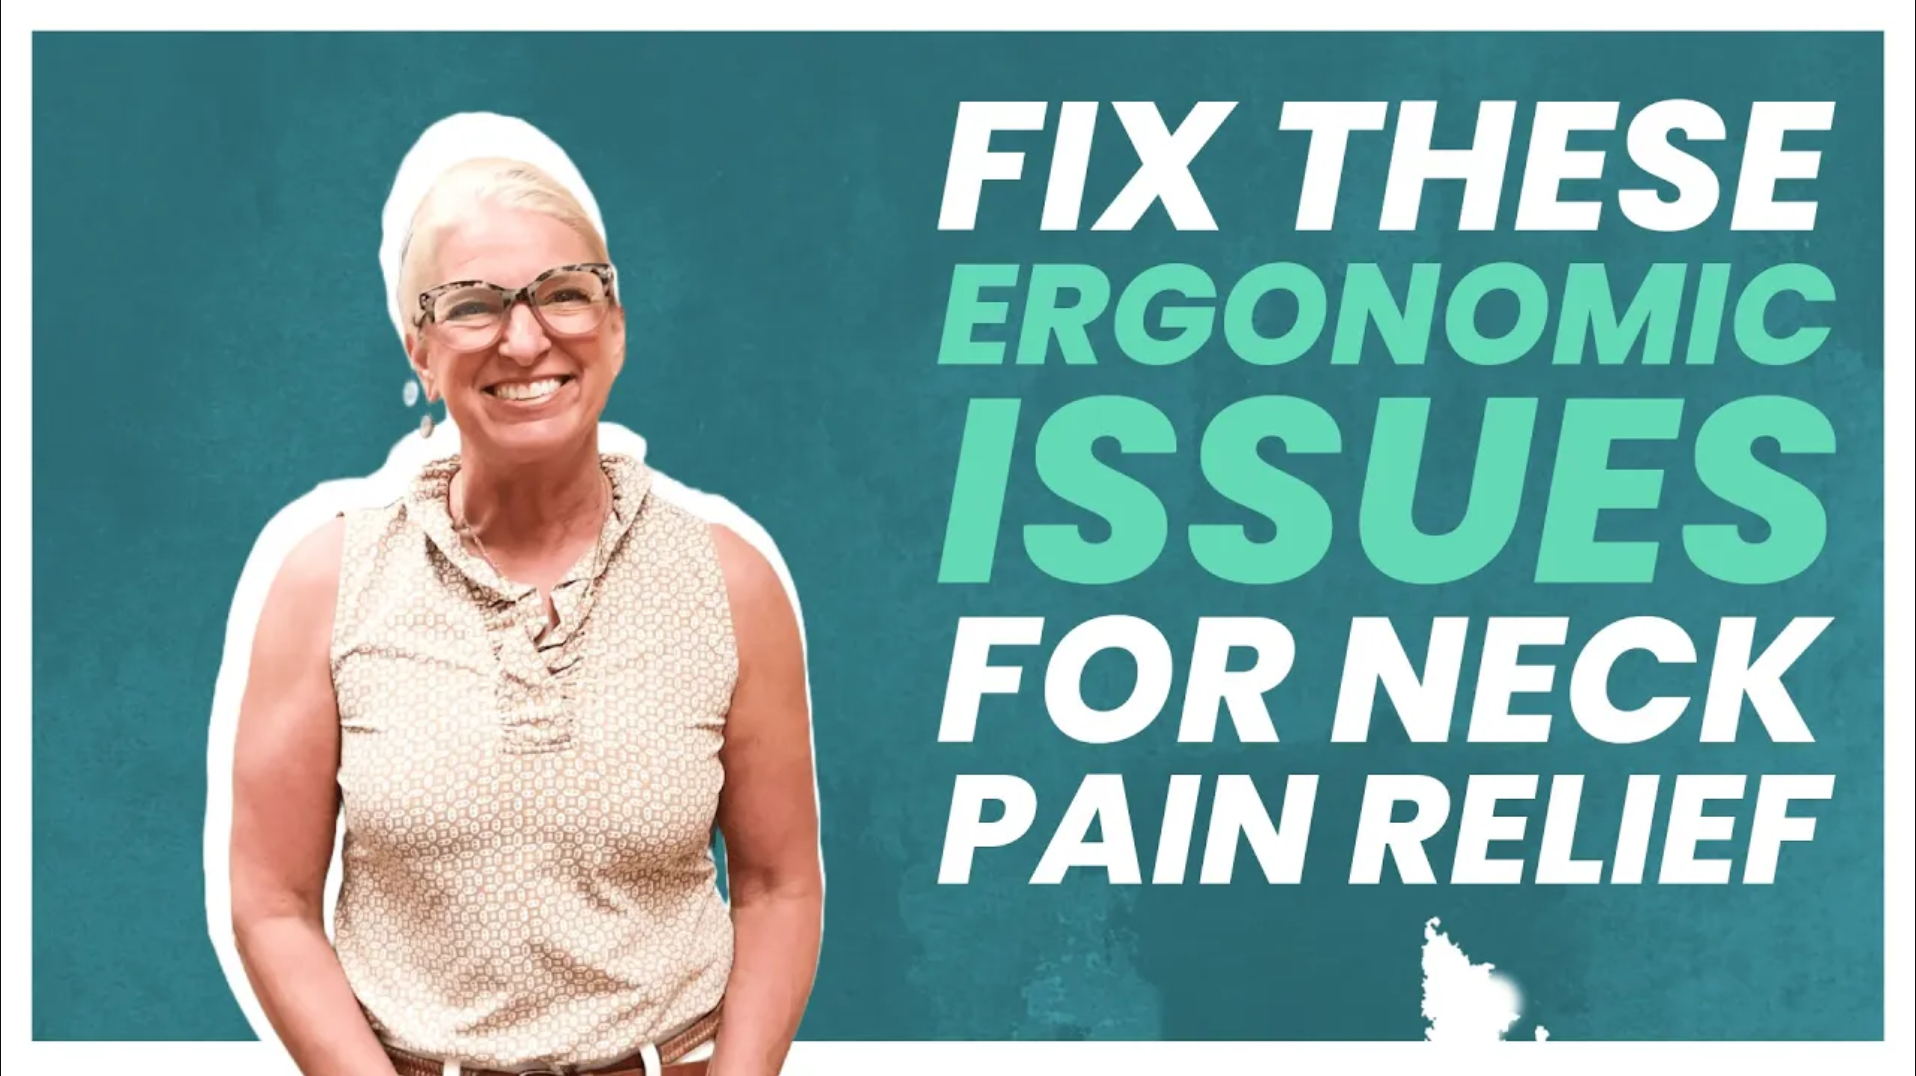 Fix These Ergonomic Issues For Neck Pain Relief | Chiropractor for Neck Pain in Belmar, NJ